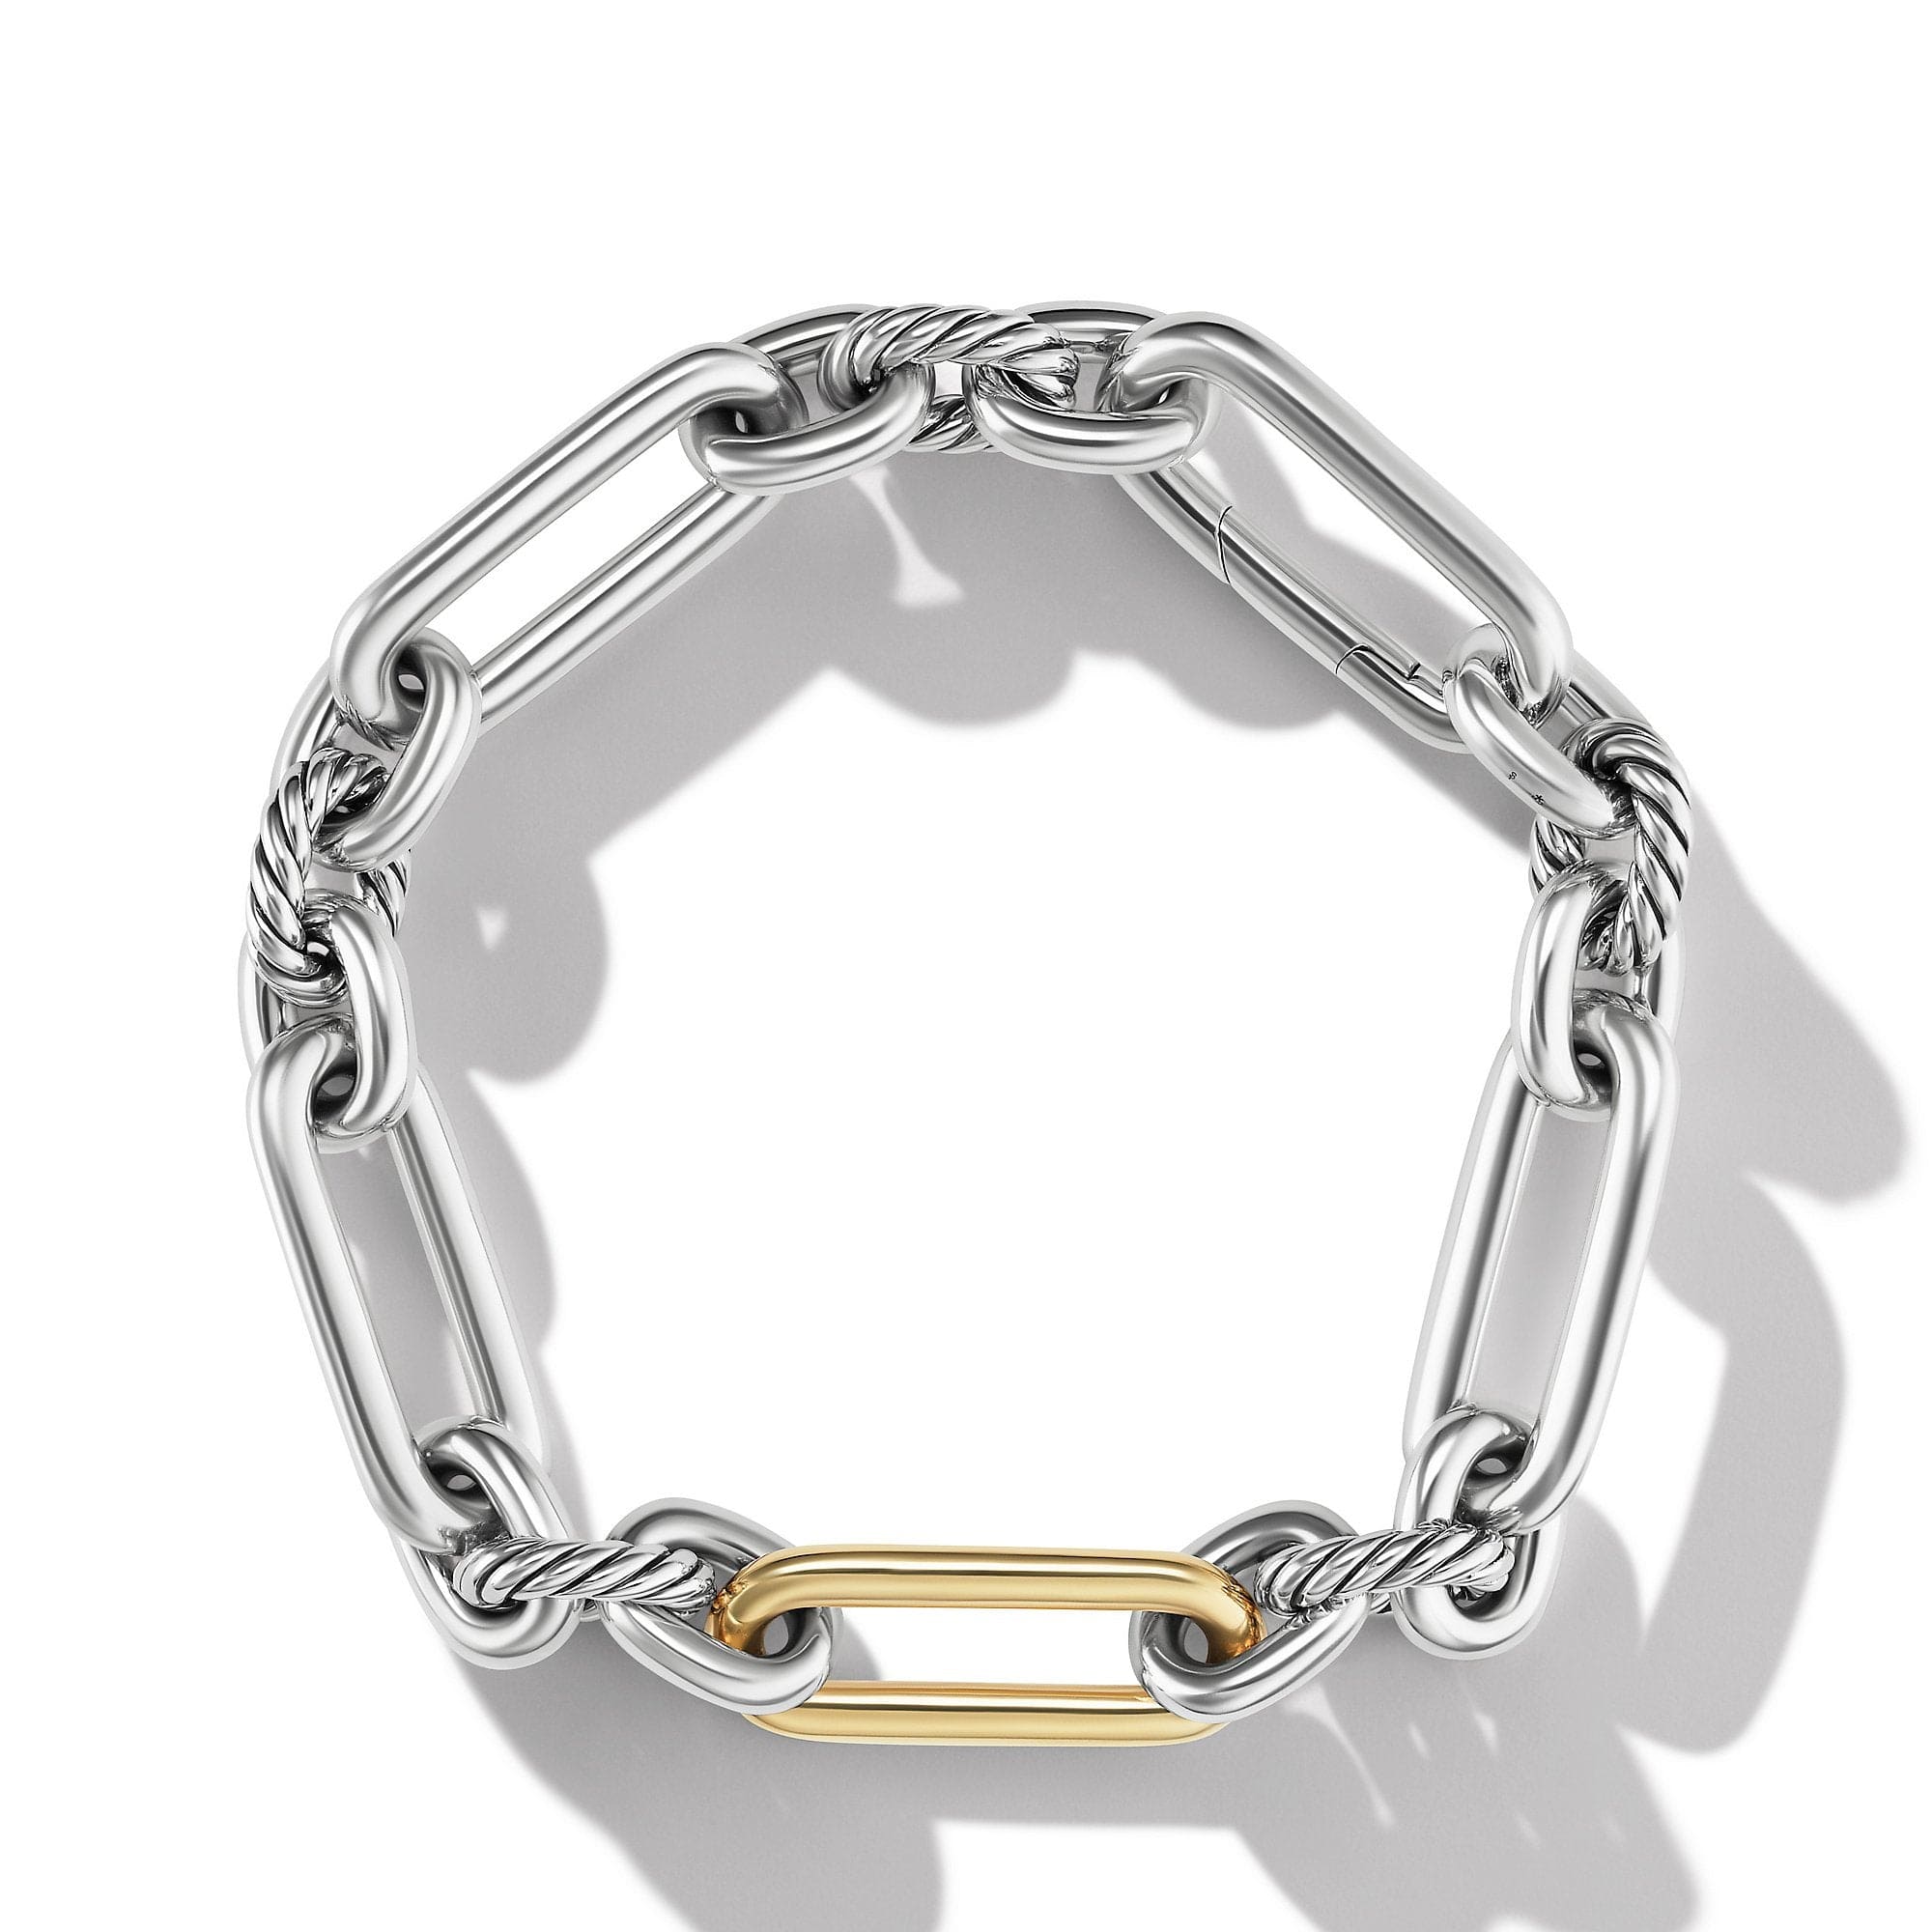 Lexington Chain Bracelet Sterling Silver with 18K Yellow Gold